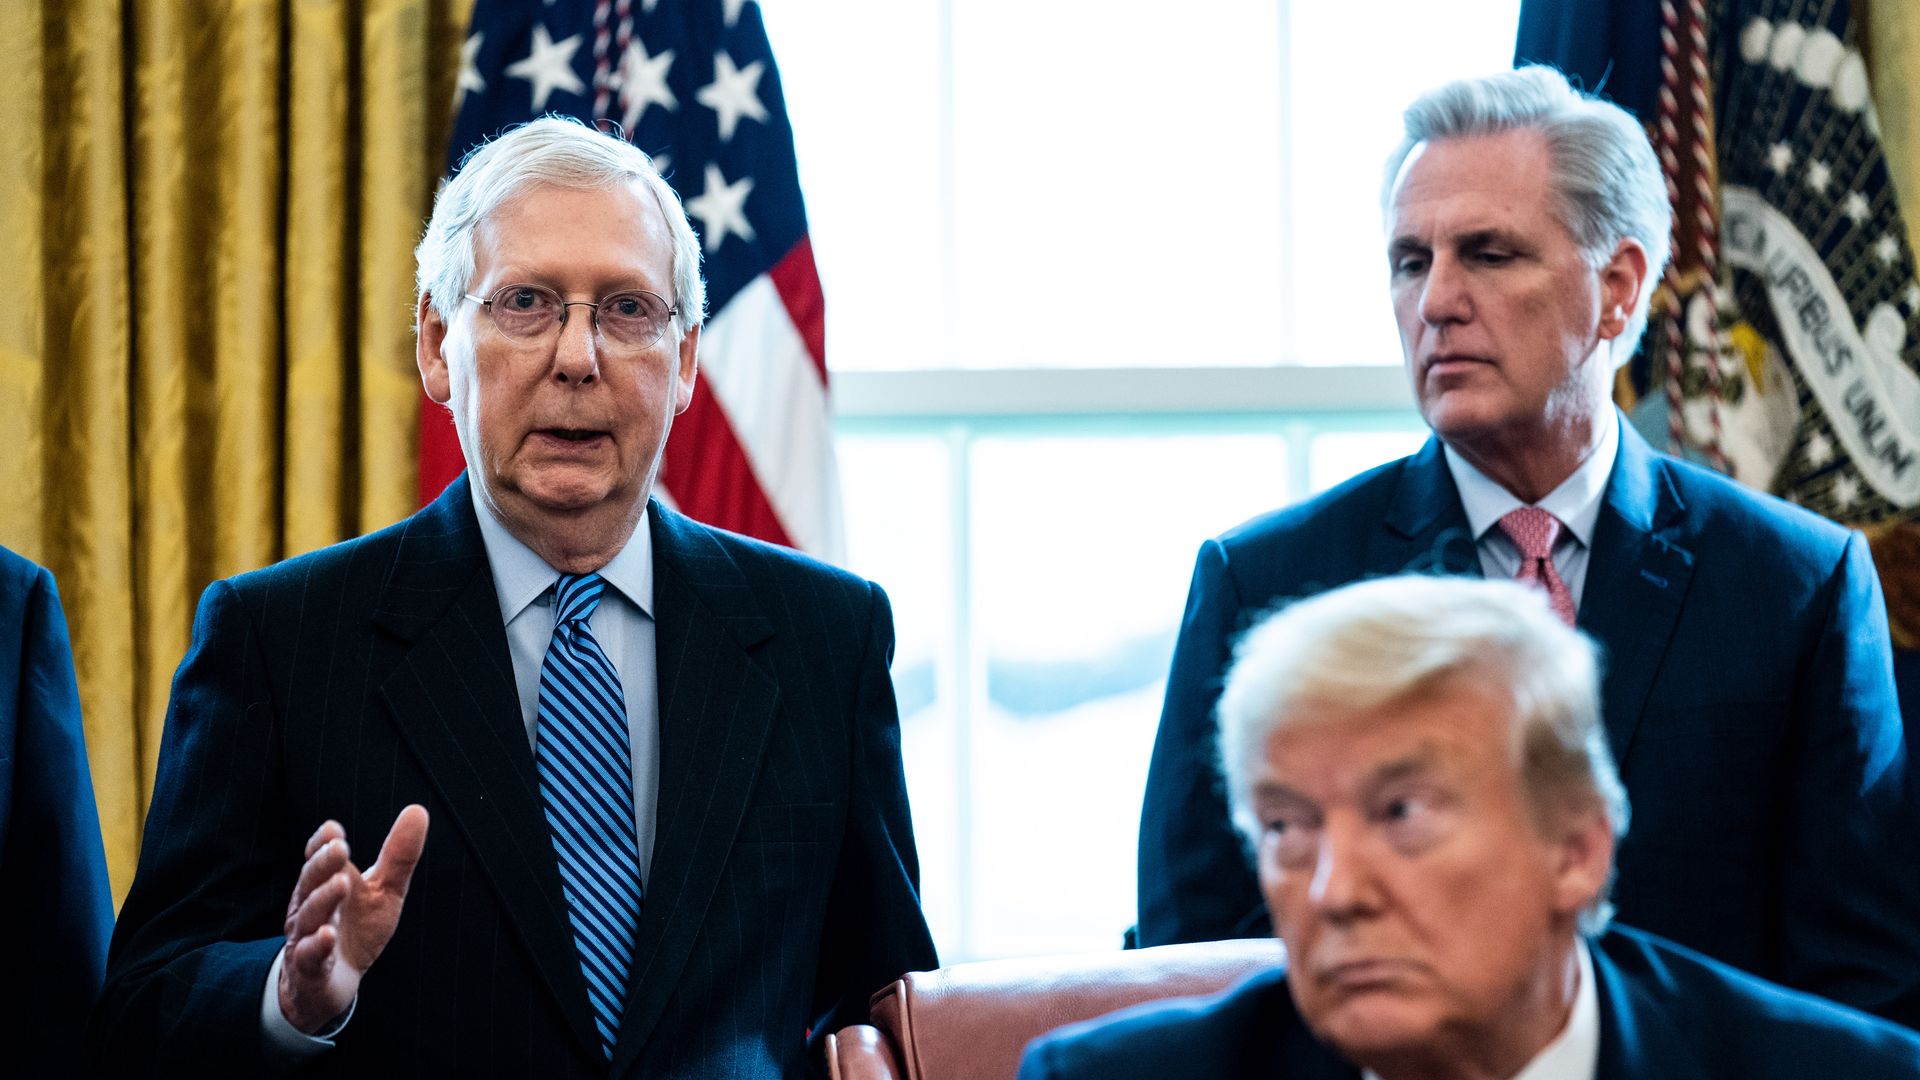 McConnell, Mccarthy and trump